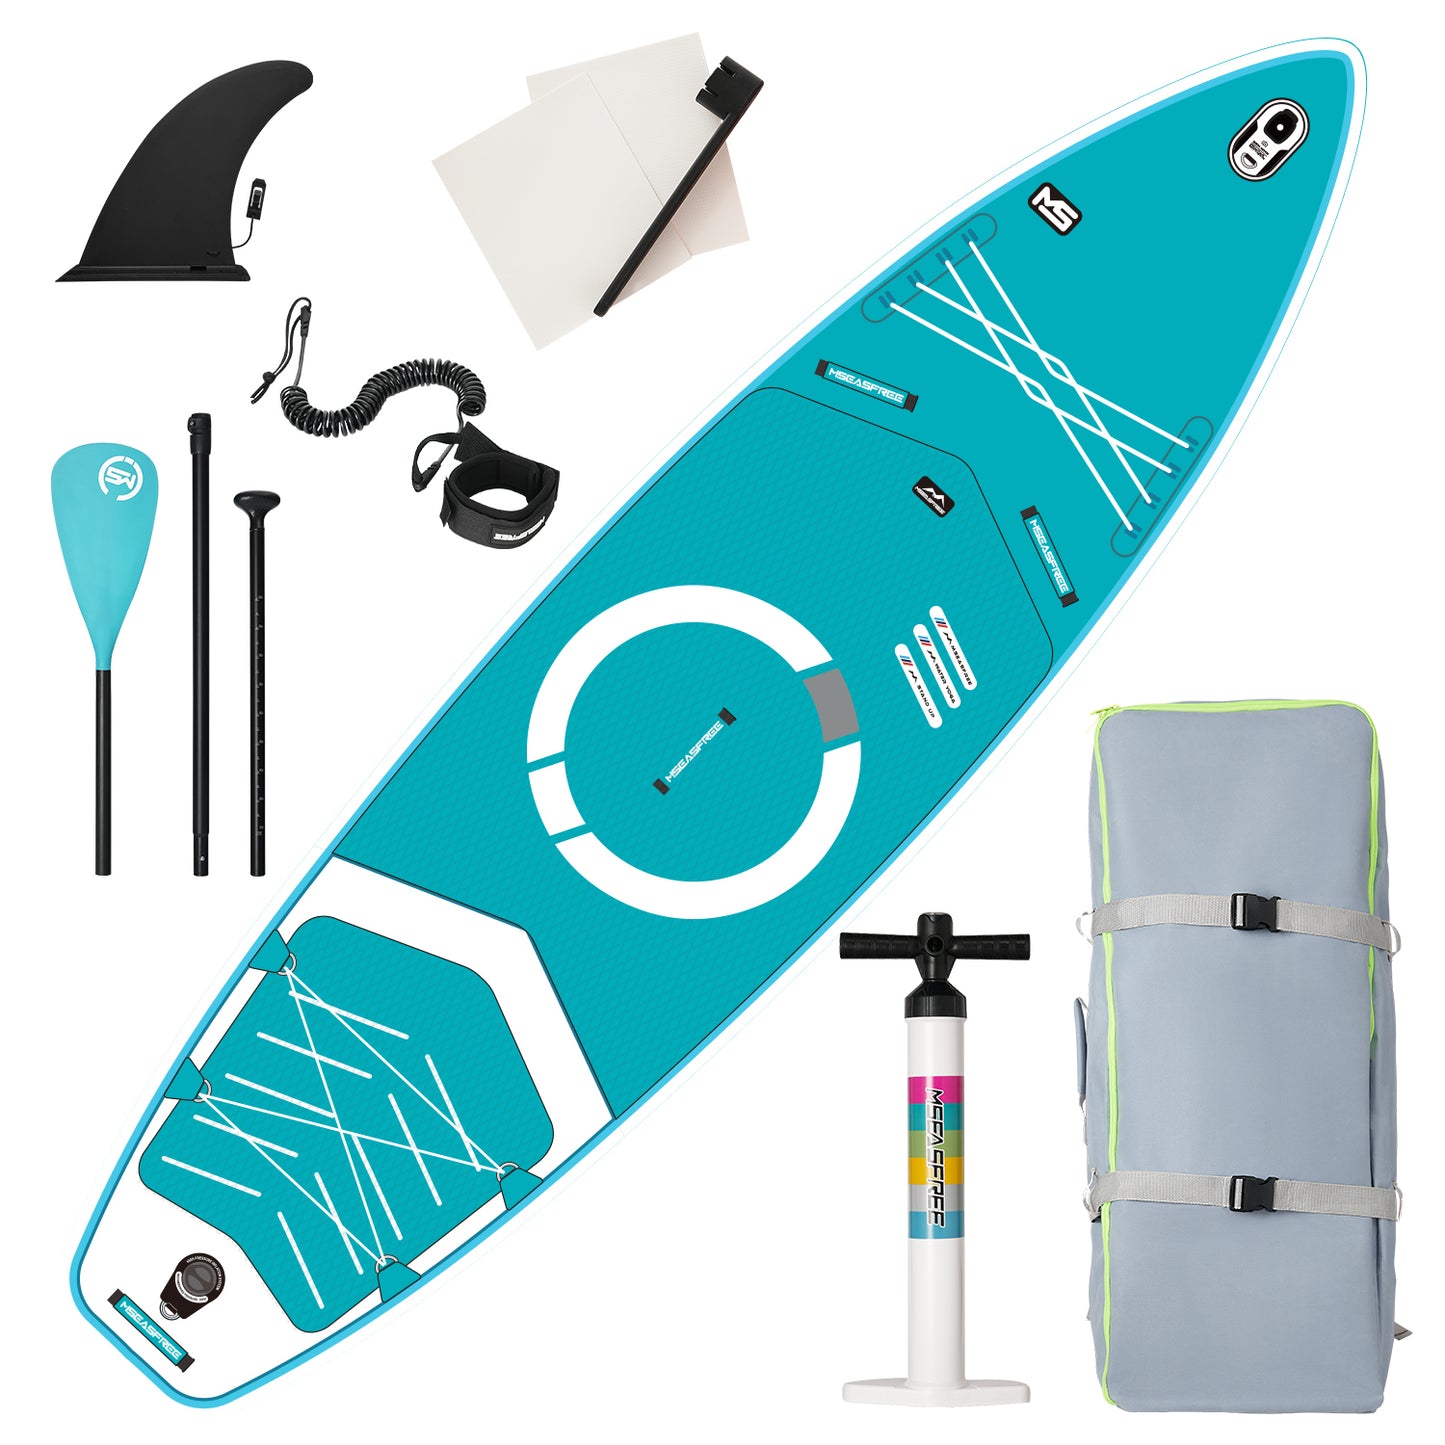 Inflatable Stand Up Paddle Board 11'x34"x6" With Accessories